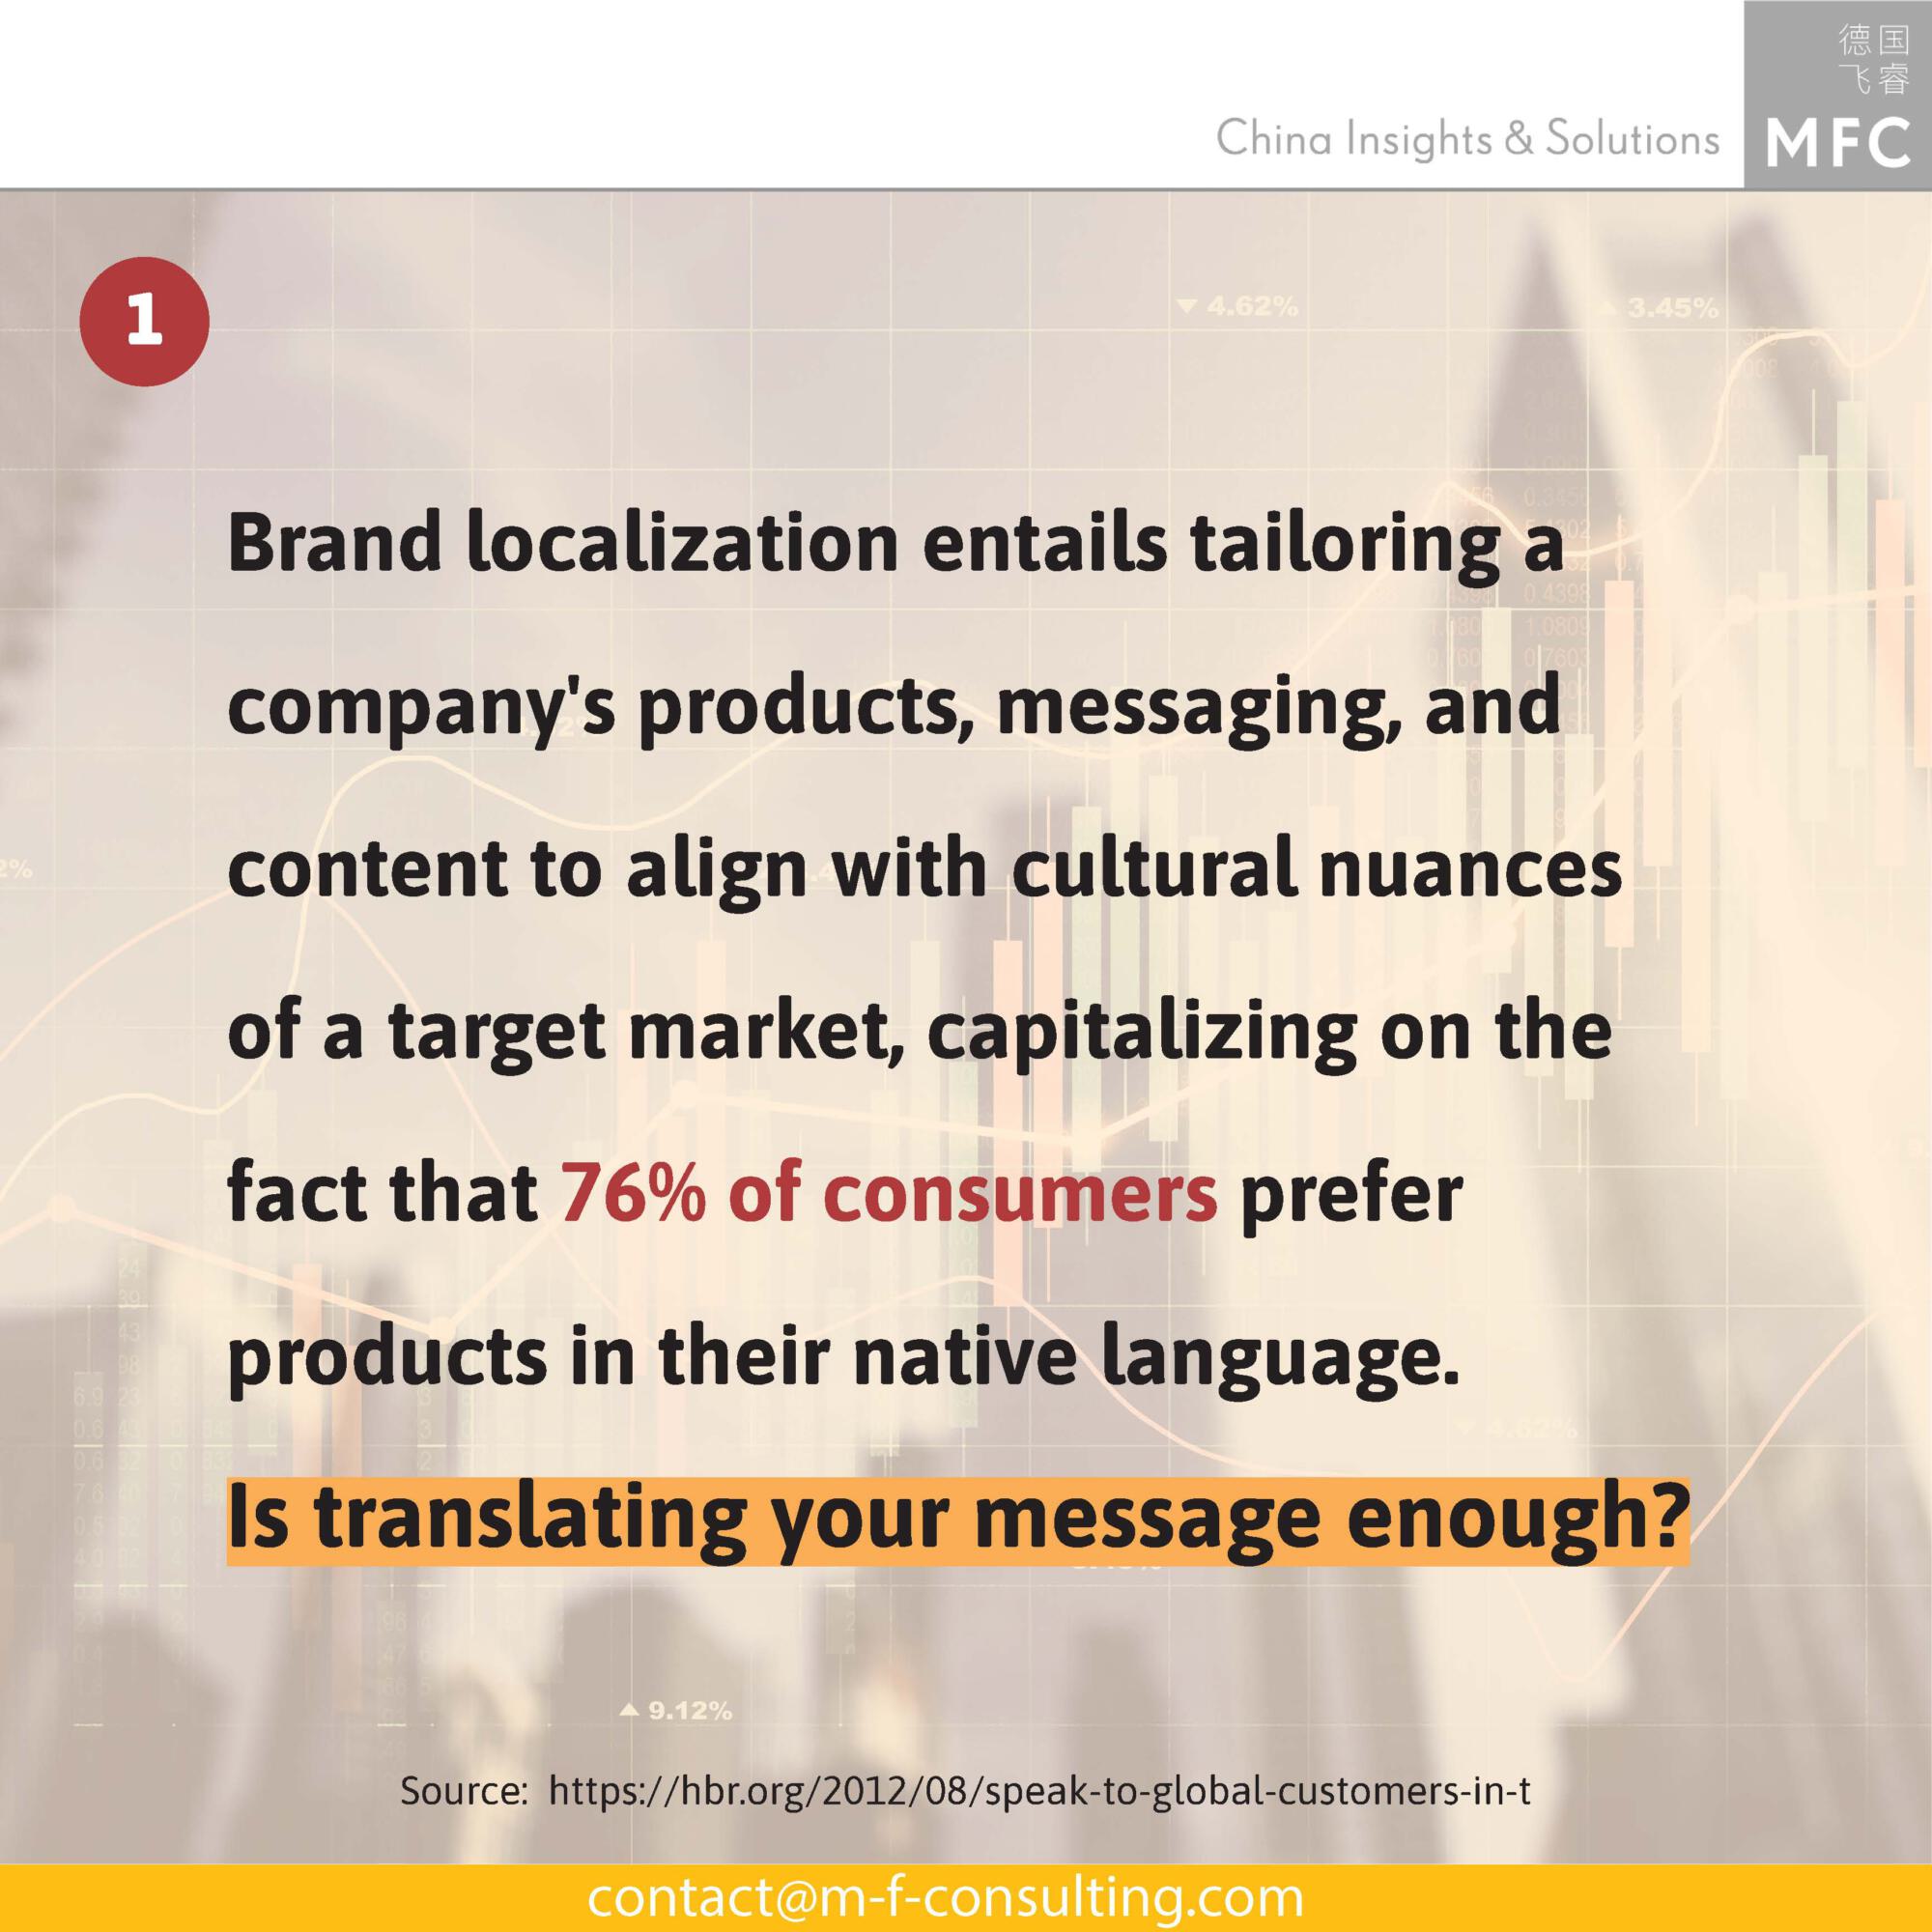 Brand localization entails tailoring a company's products, messaging, and content in align with cultural nuances of a target market, capitalizing on the fact that 76% of consumers prefer products in their native language.